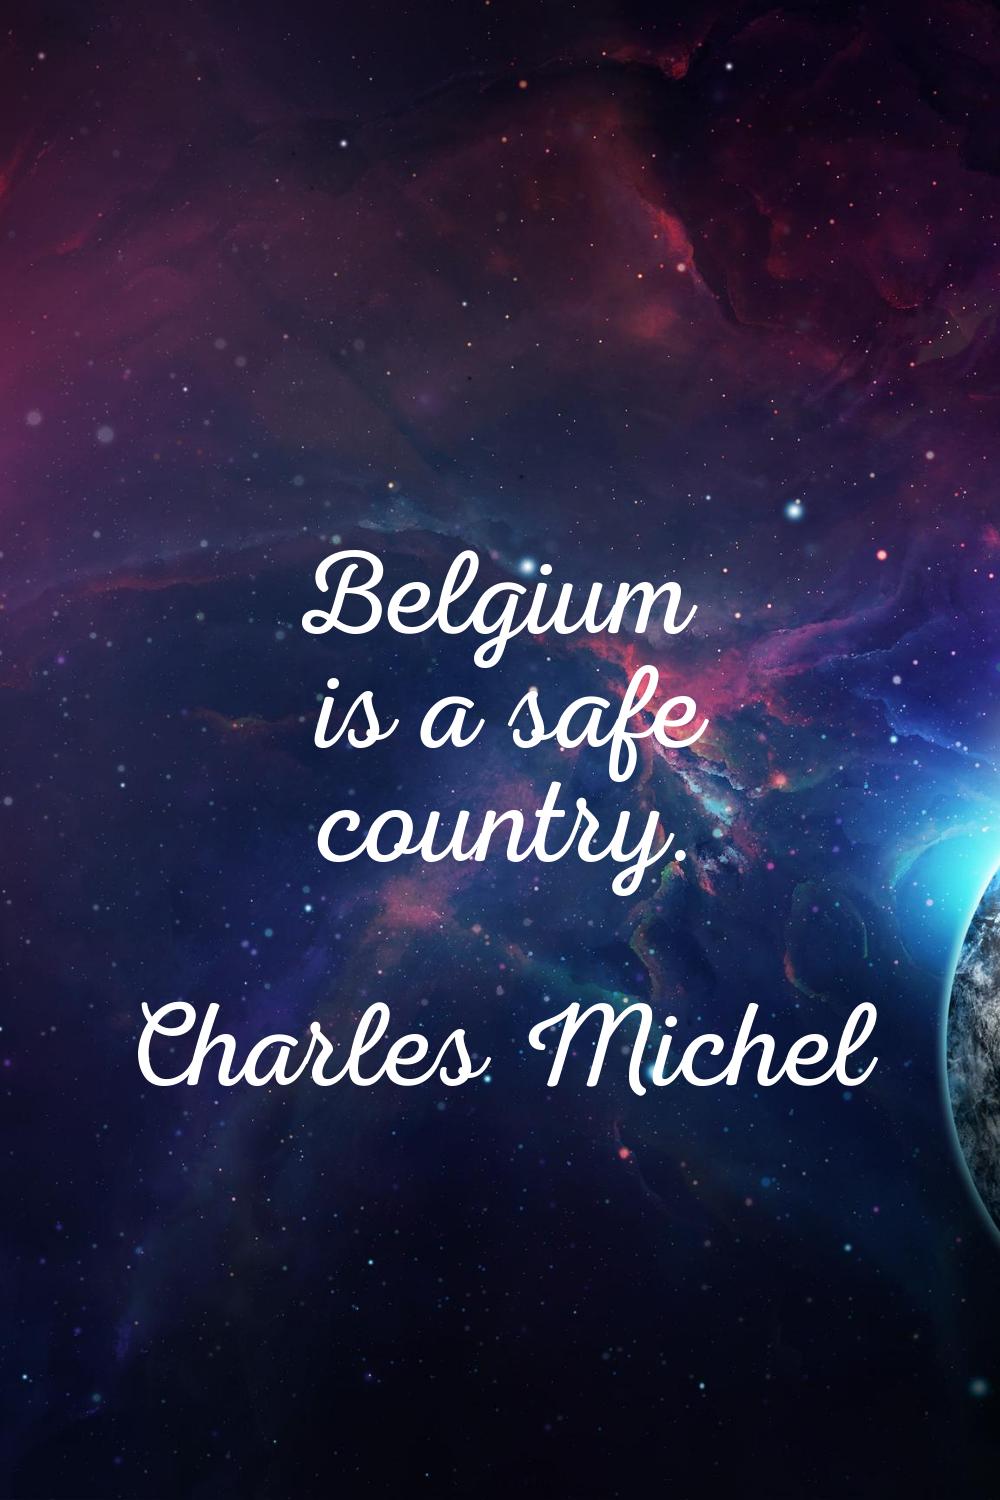 Belgium is a safe country.